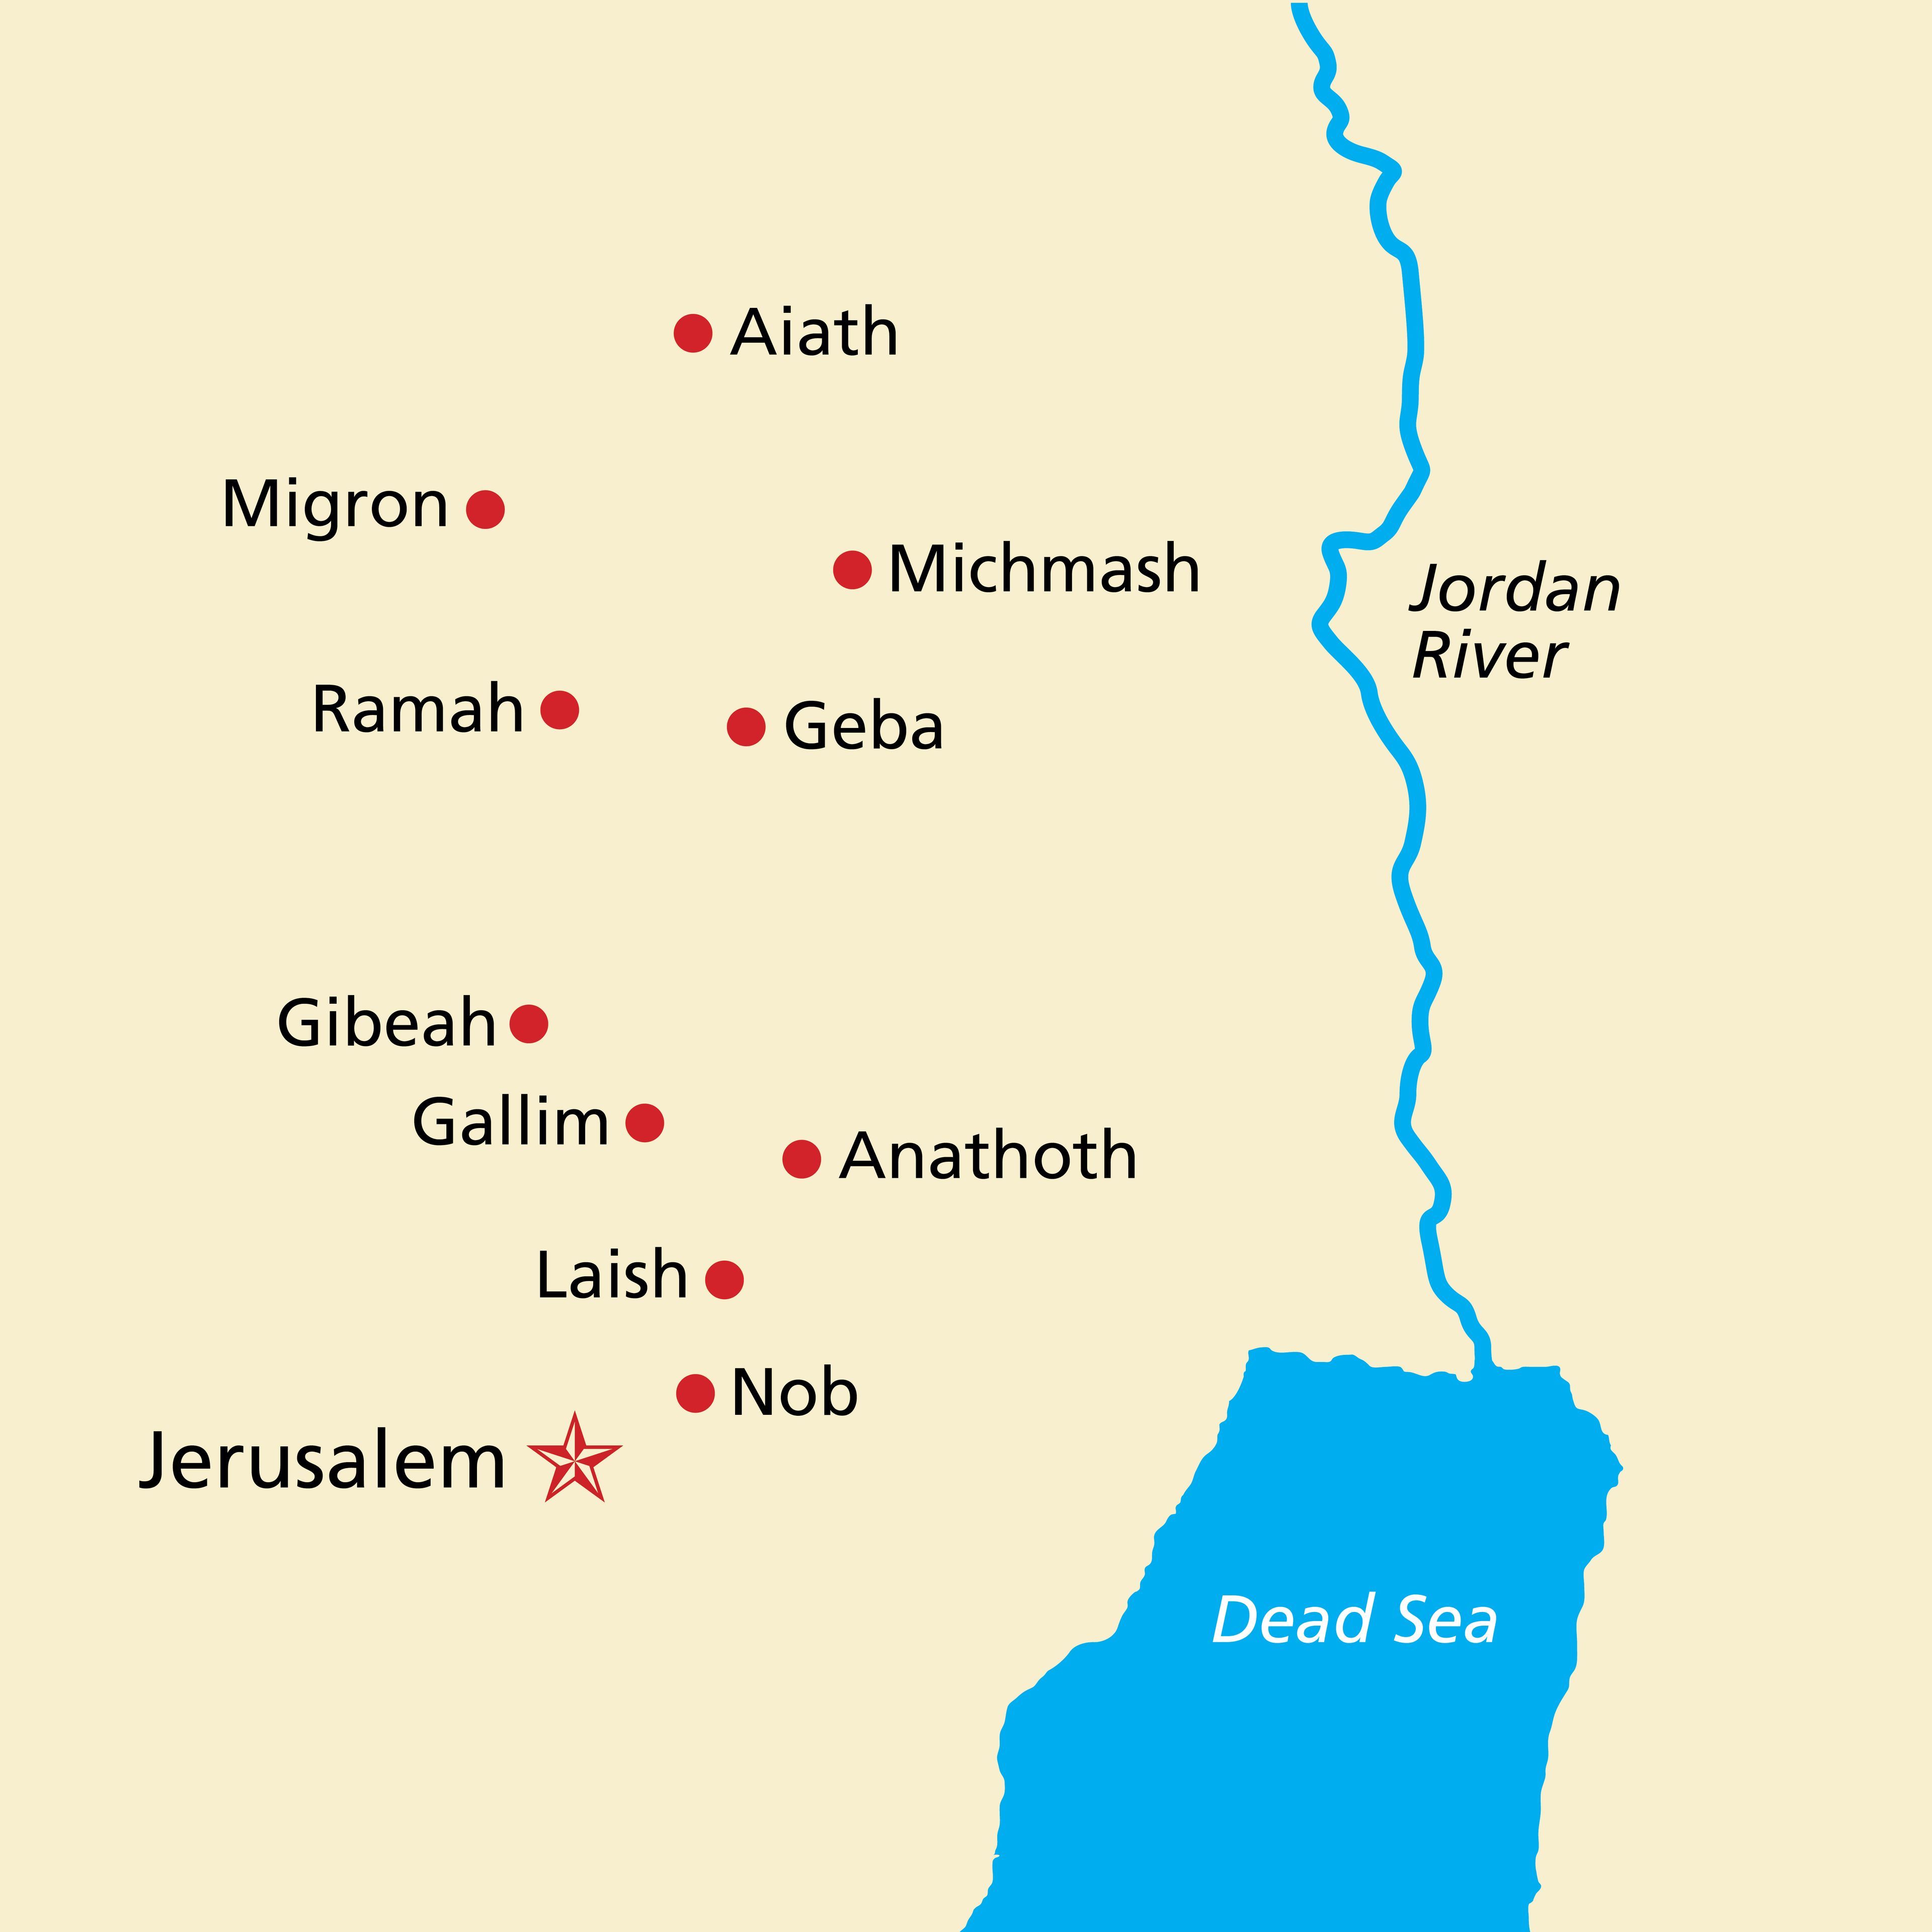 A map of the Holy Land, including Jerusalem, the Dead Sea, and the Jordan River.